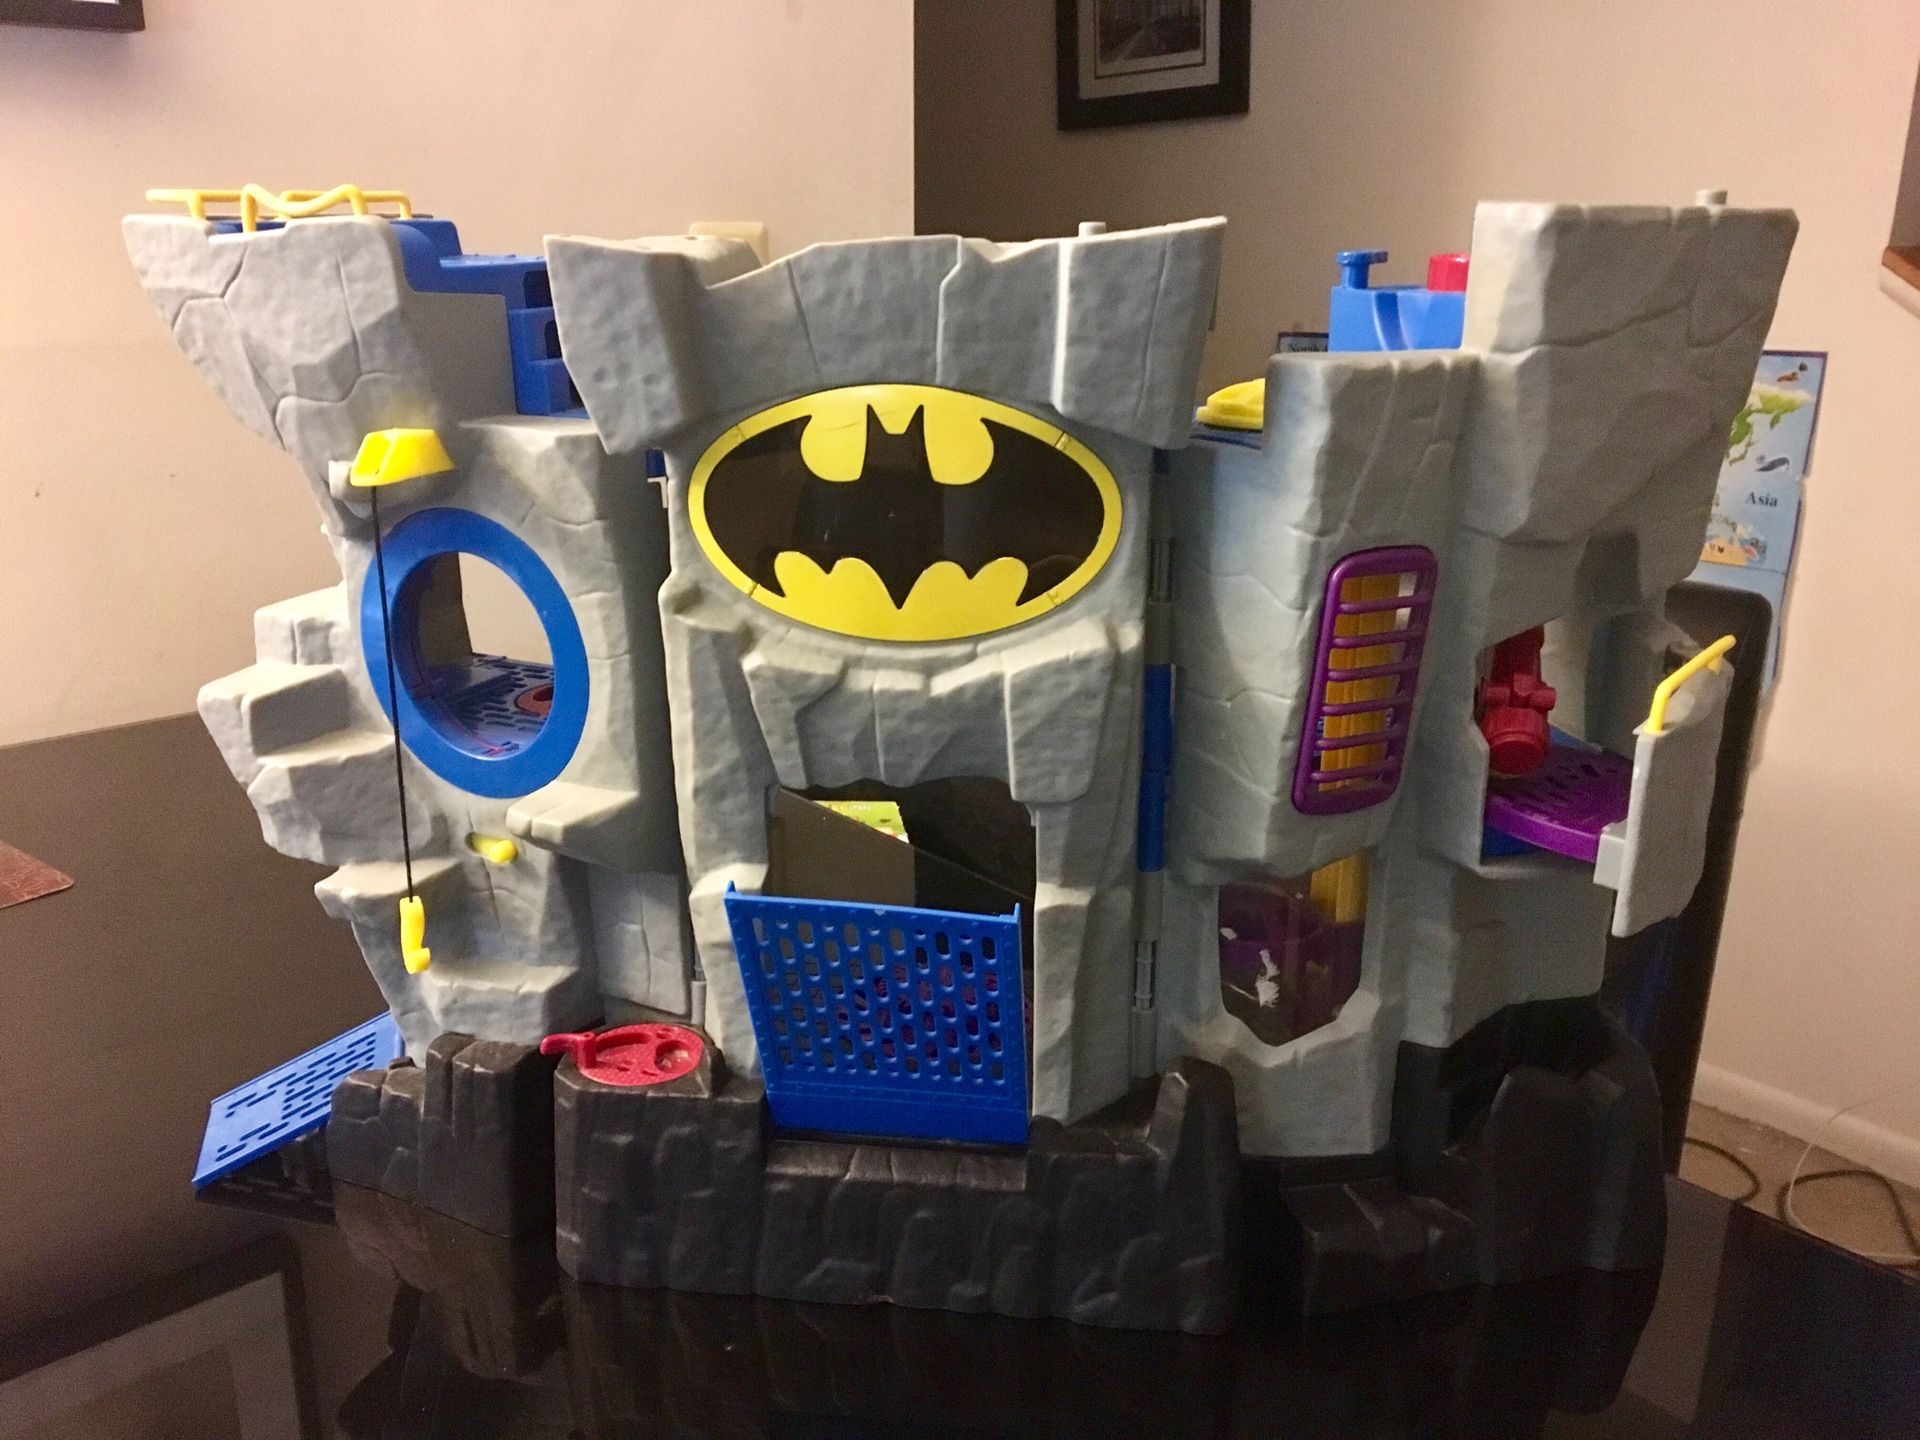 Batman cave and star war toys with mini figures